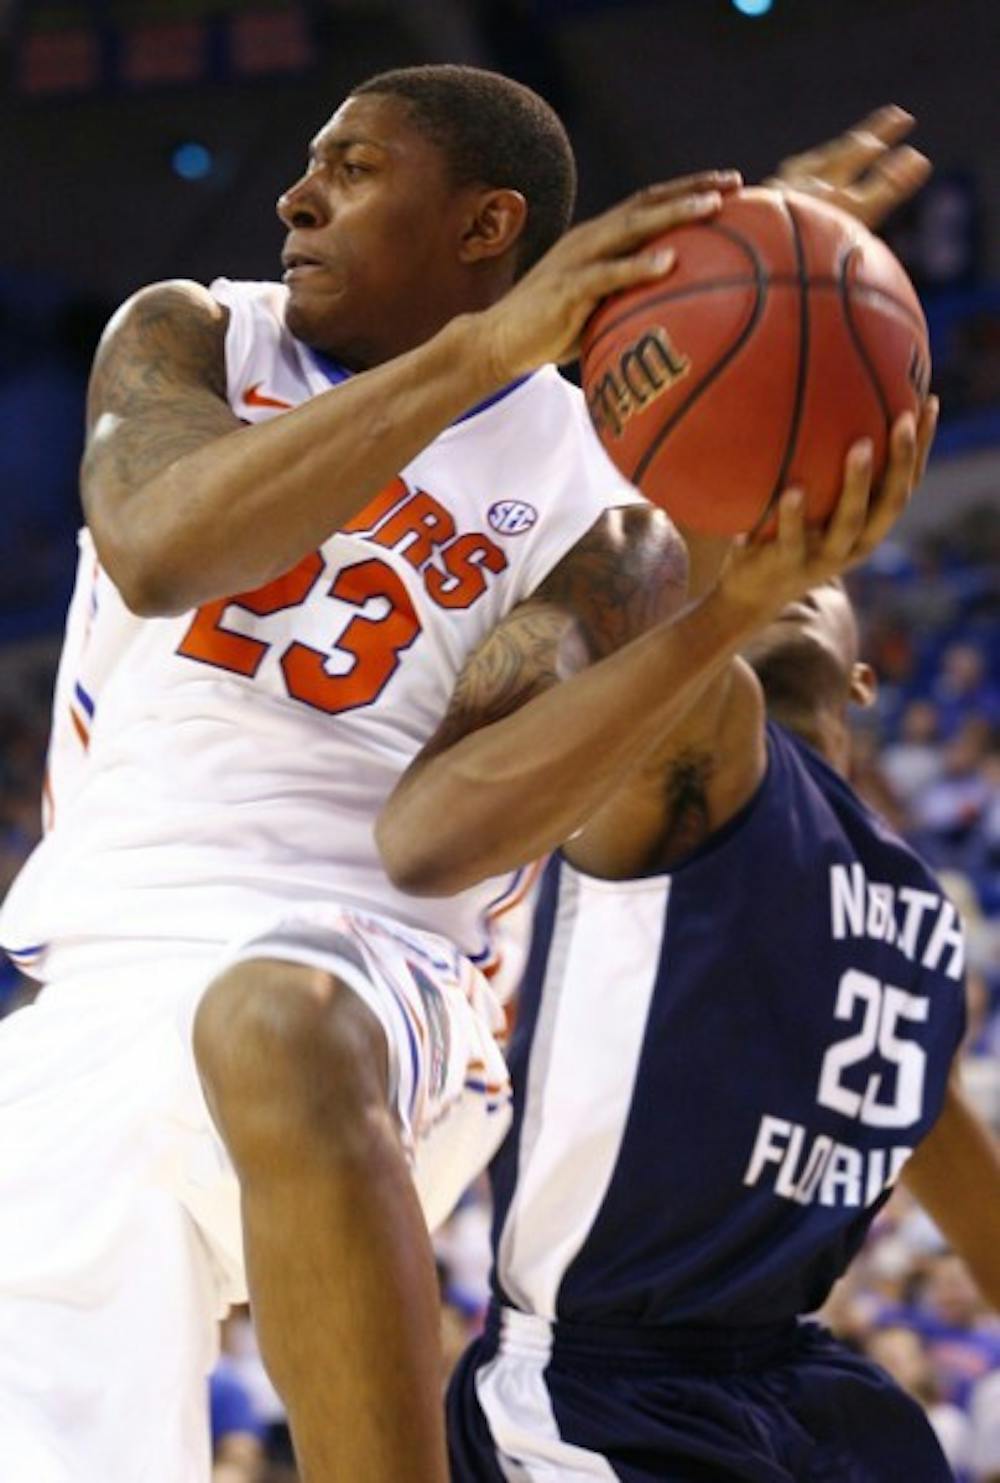 <p>Florida freshman Brad Beal (23) scored 12 points and grabbed 10 rebounds in a 91-55 win against UNF on Wednesday.</p>